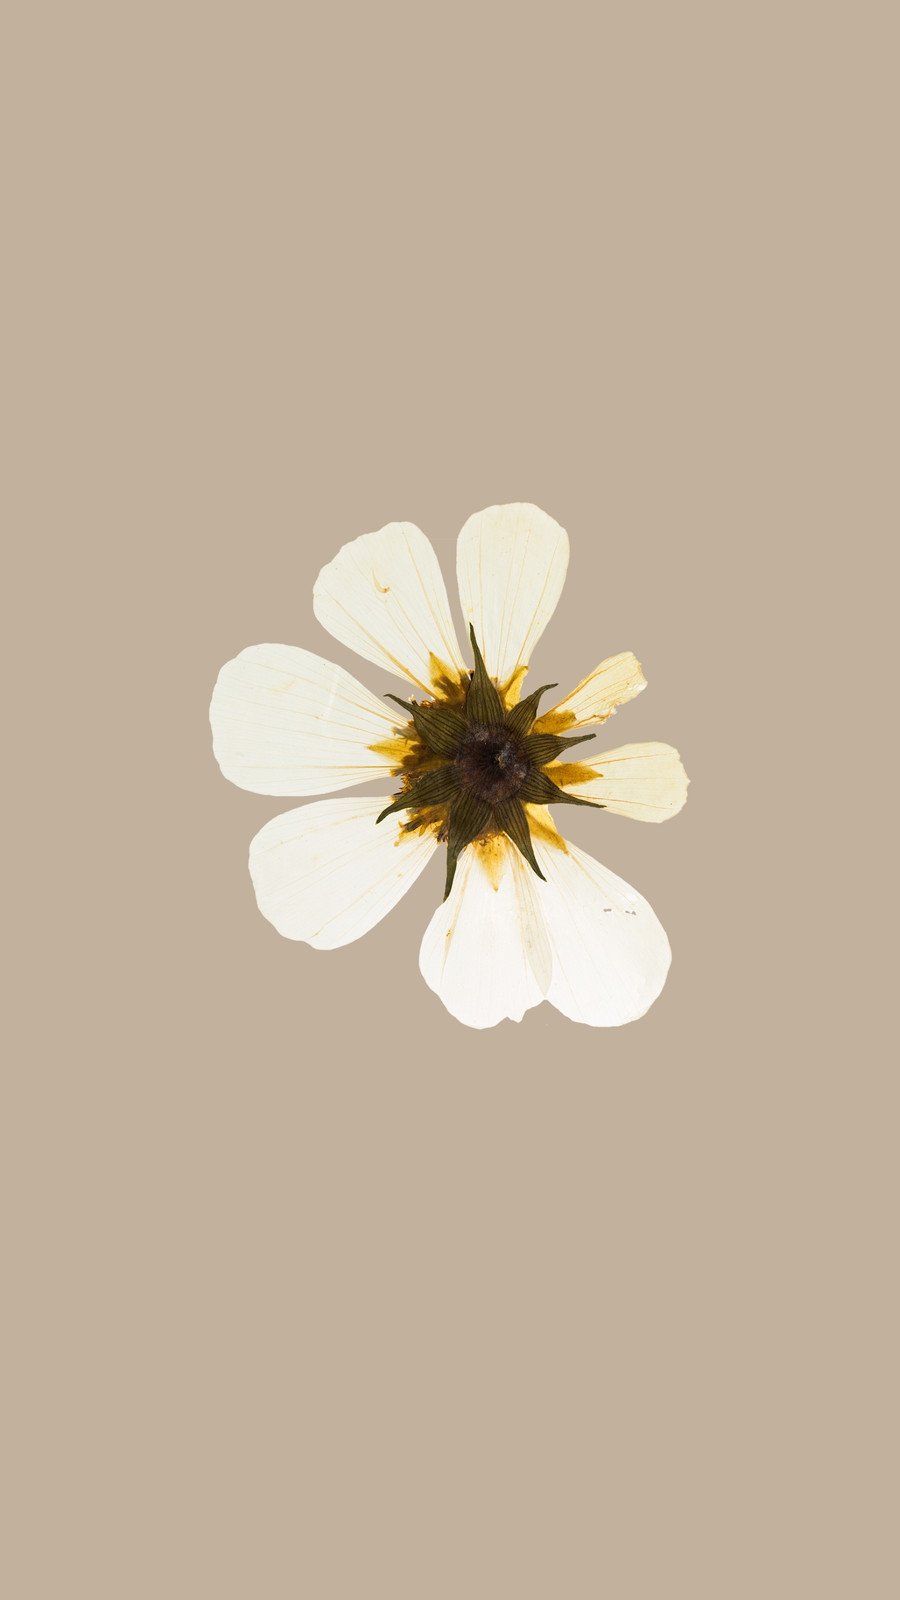 White Illustration Flowers Phone Wallpaper Template and Ideas for Design |  Fotor